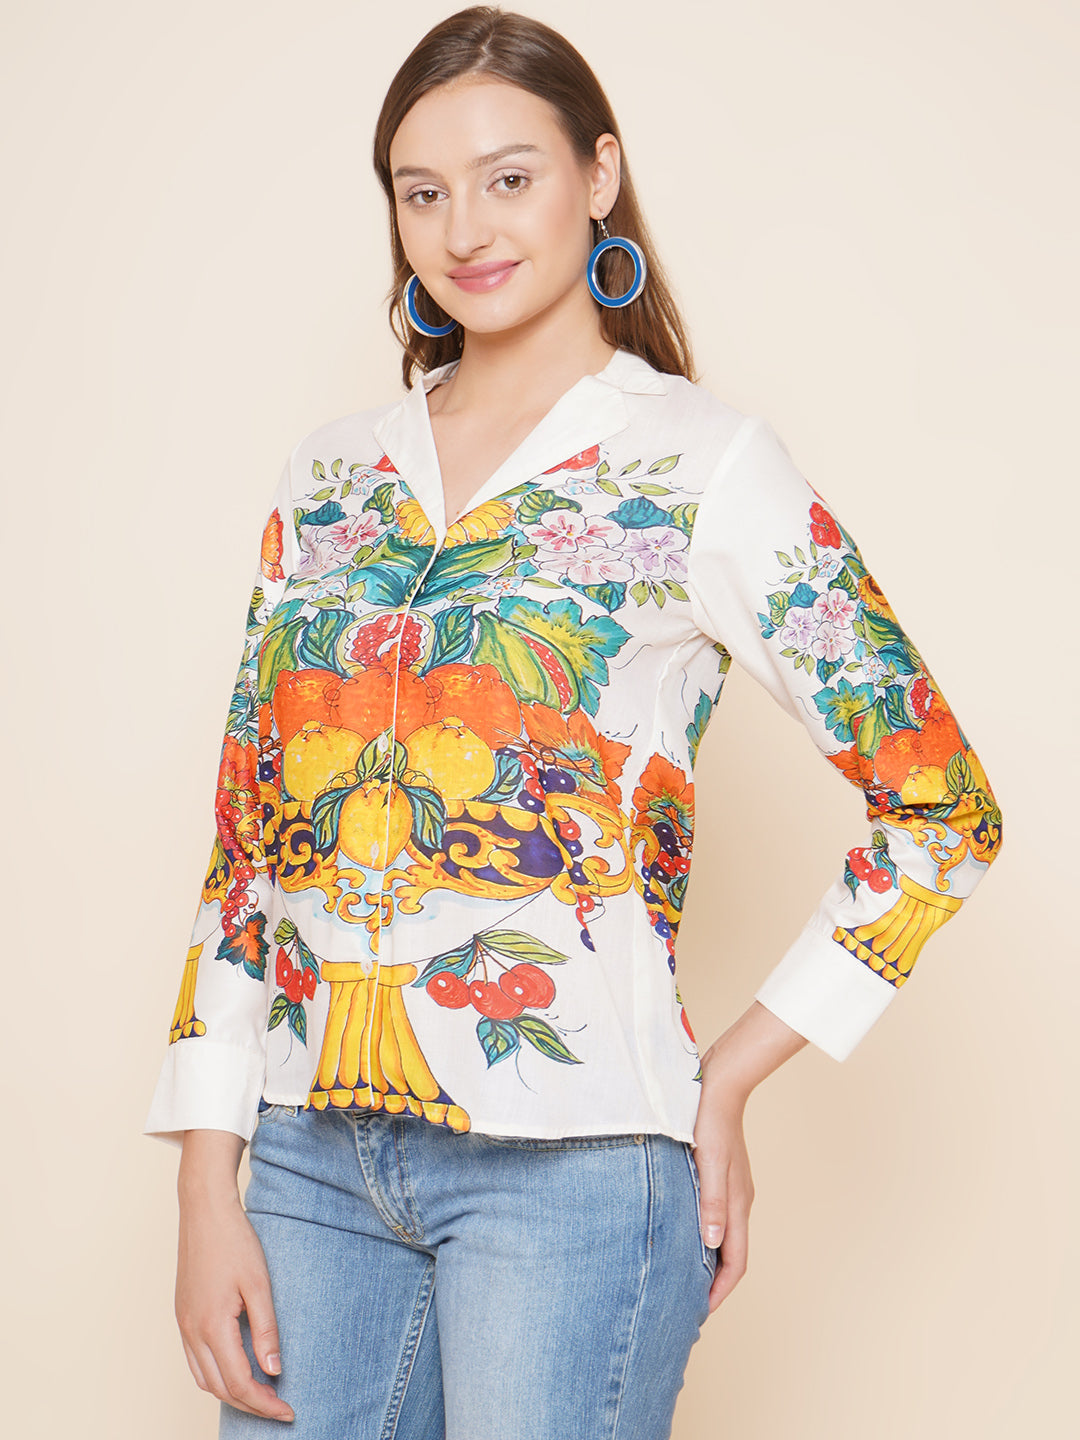 Bhama Couture White Multi Printed Shirt Style Top